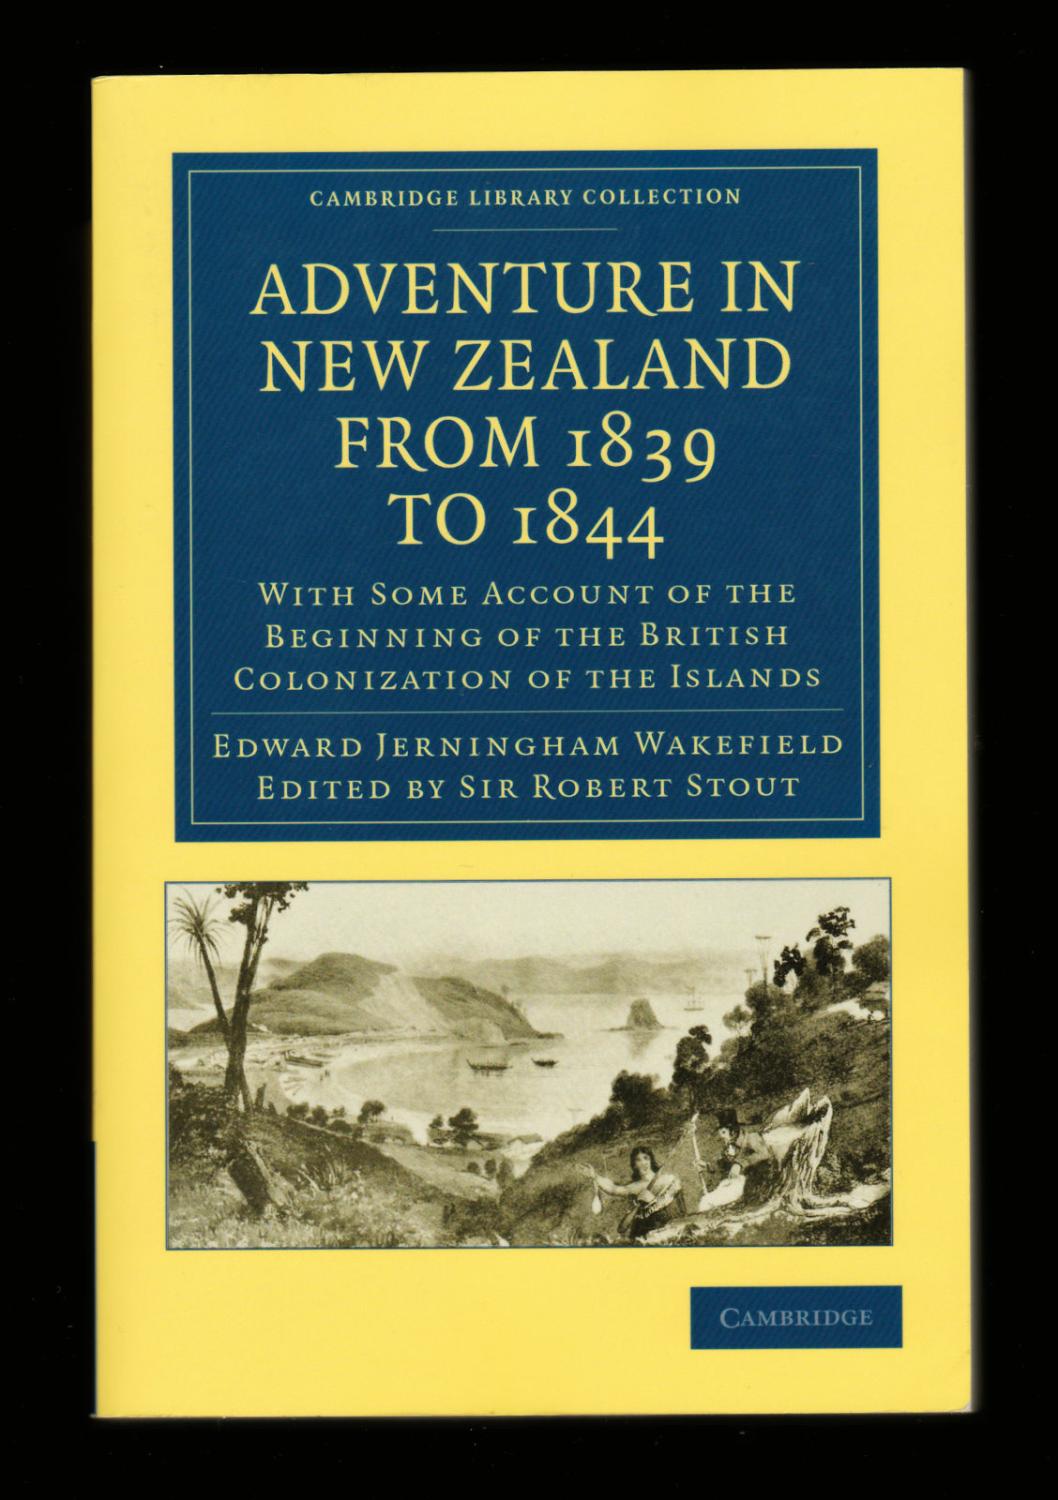 Adventure in New Zealand from 1839 to 1844: With Some Account of the Beginning of the British Colonization of the Islands (Cambridge Library Collection - History of Oceania) - Edward Jerningham Wakefield; Sir Robert Stout (Editor)